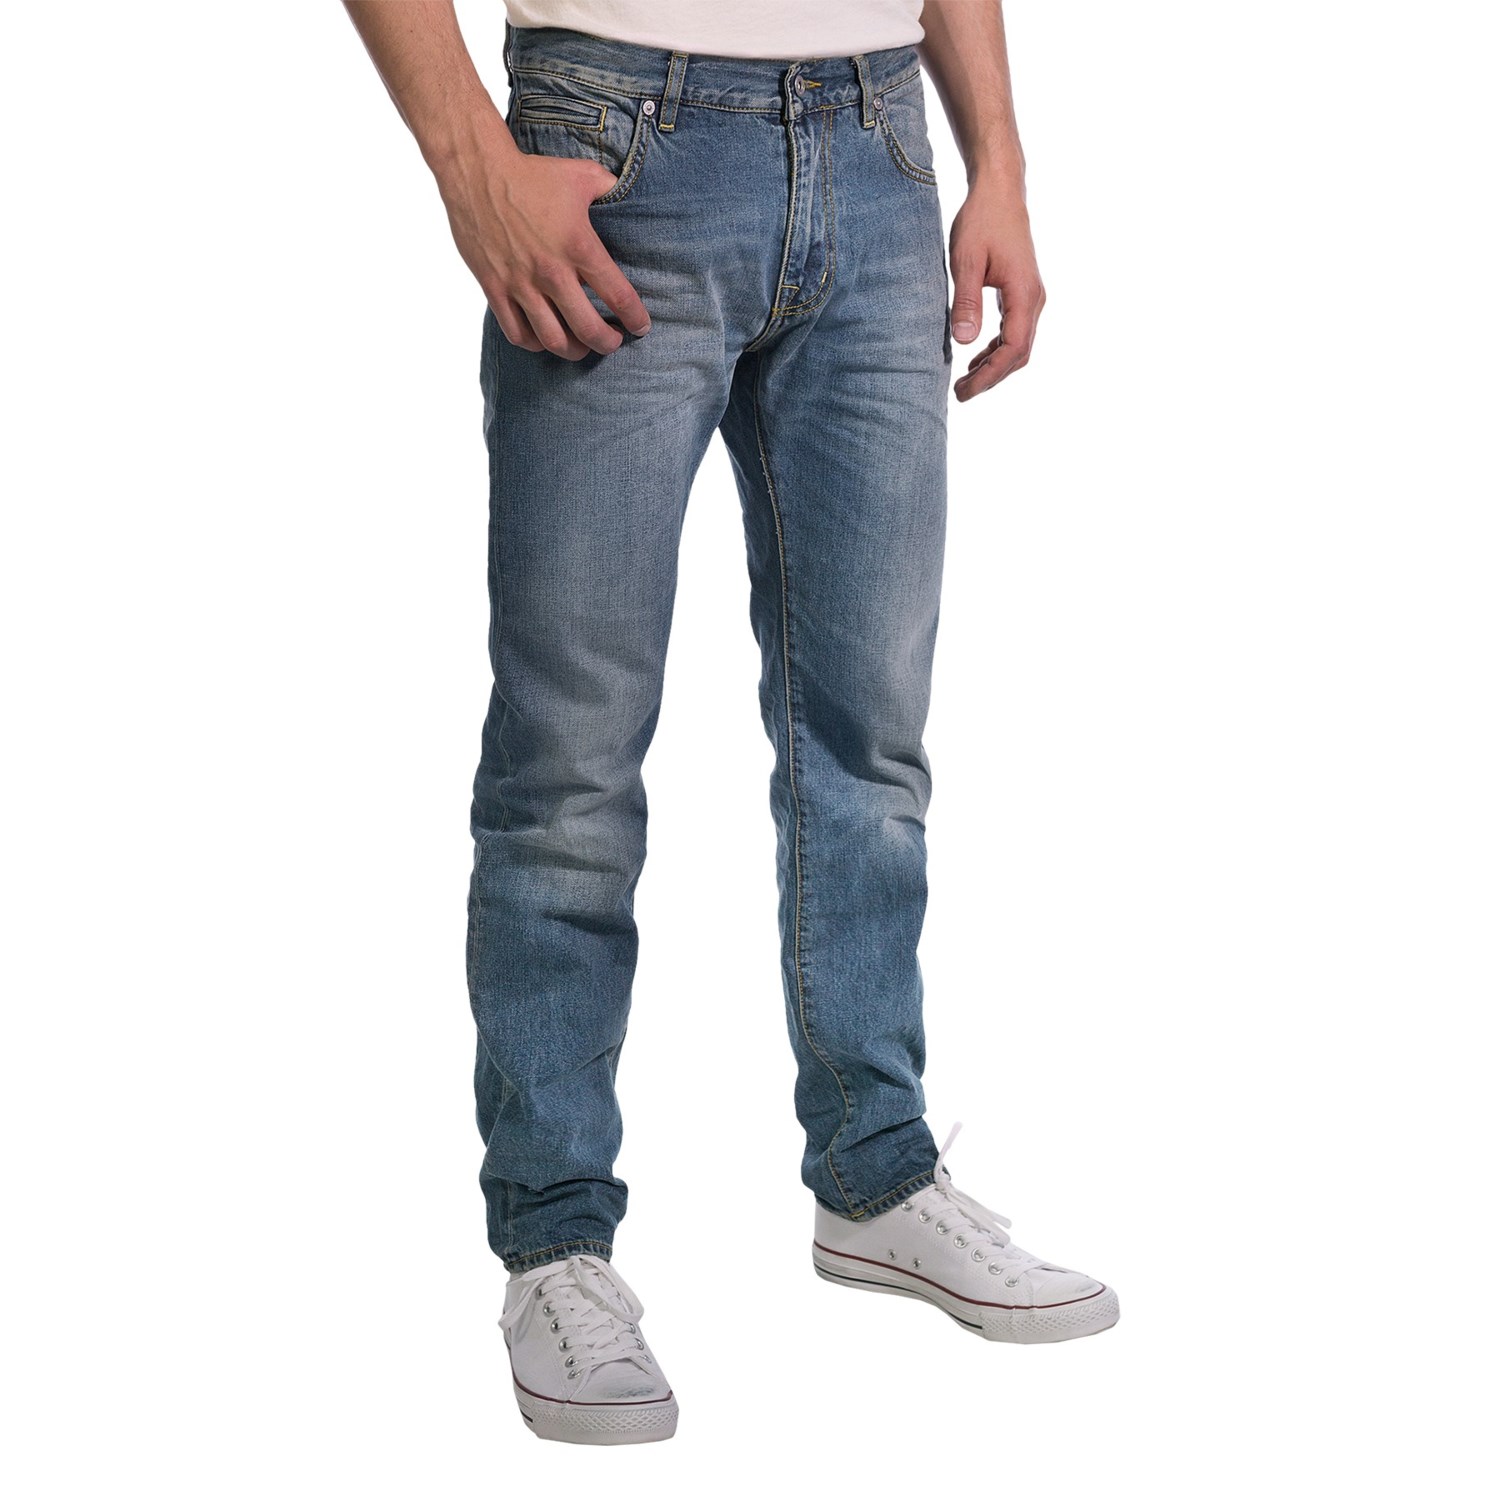 Gant Worn In Jeans - Low Rise, Tapered Leg (For Men) in Mid Blue Worn